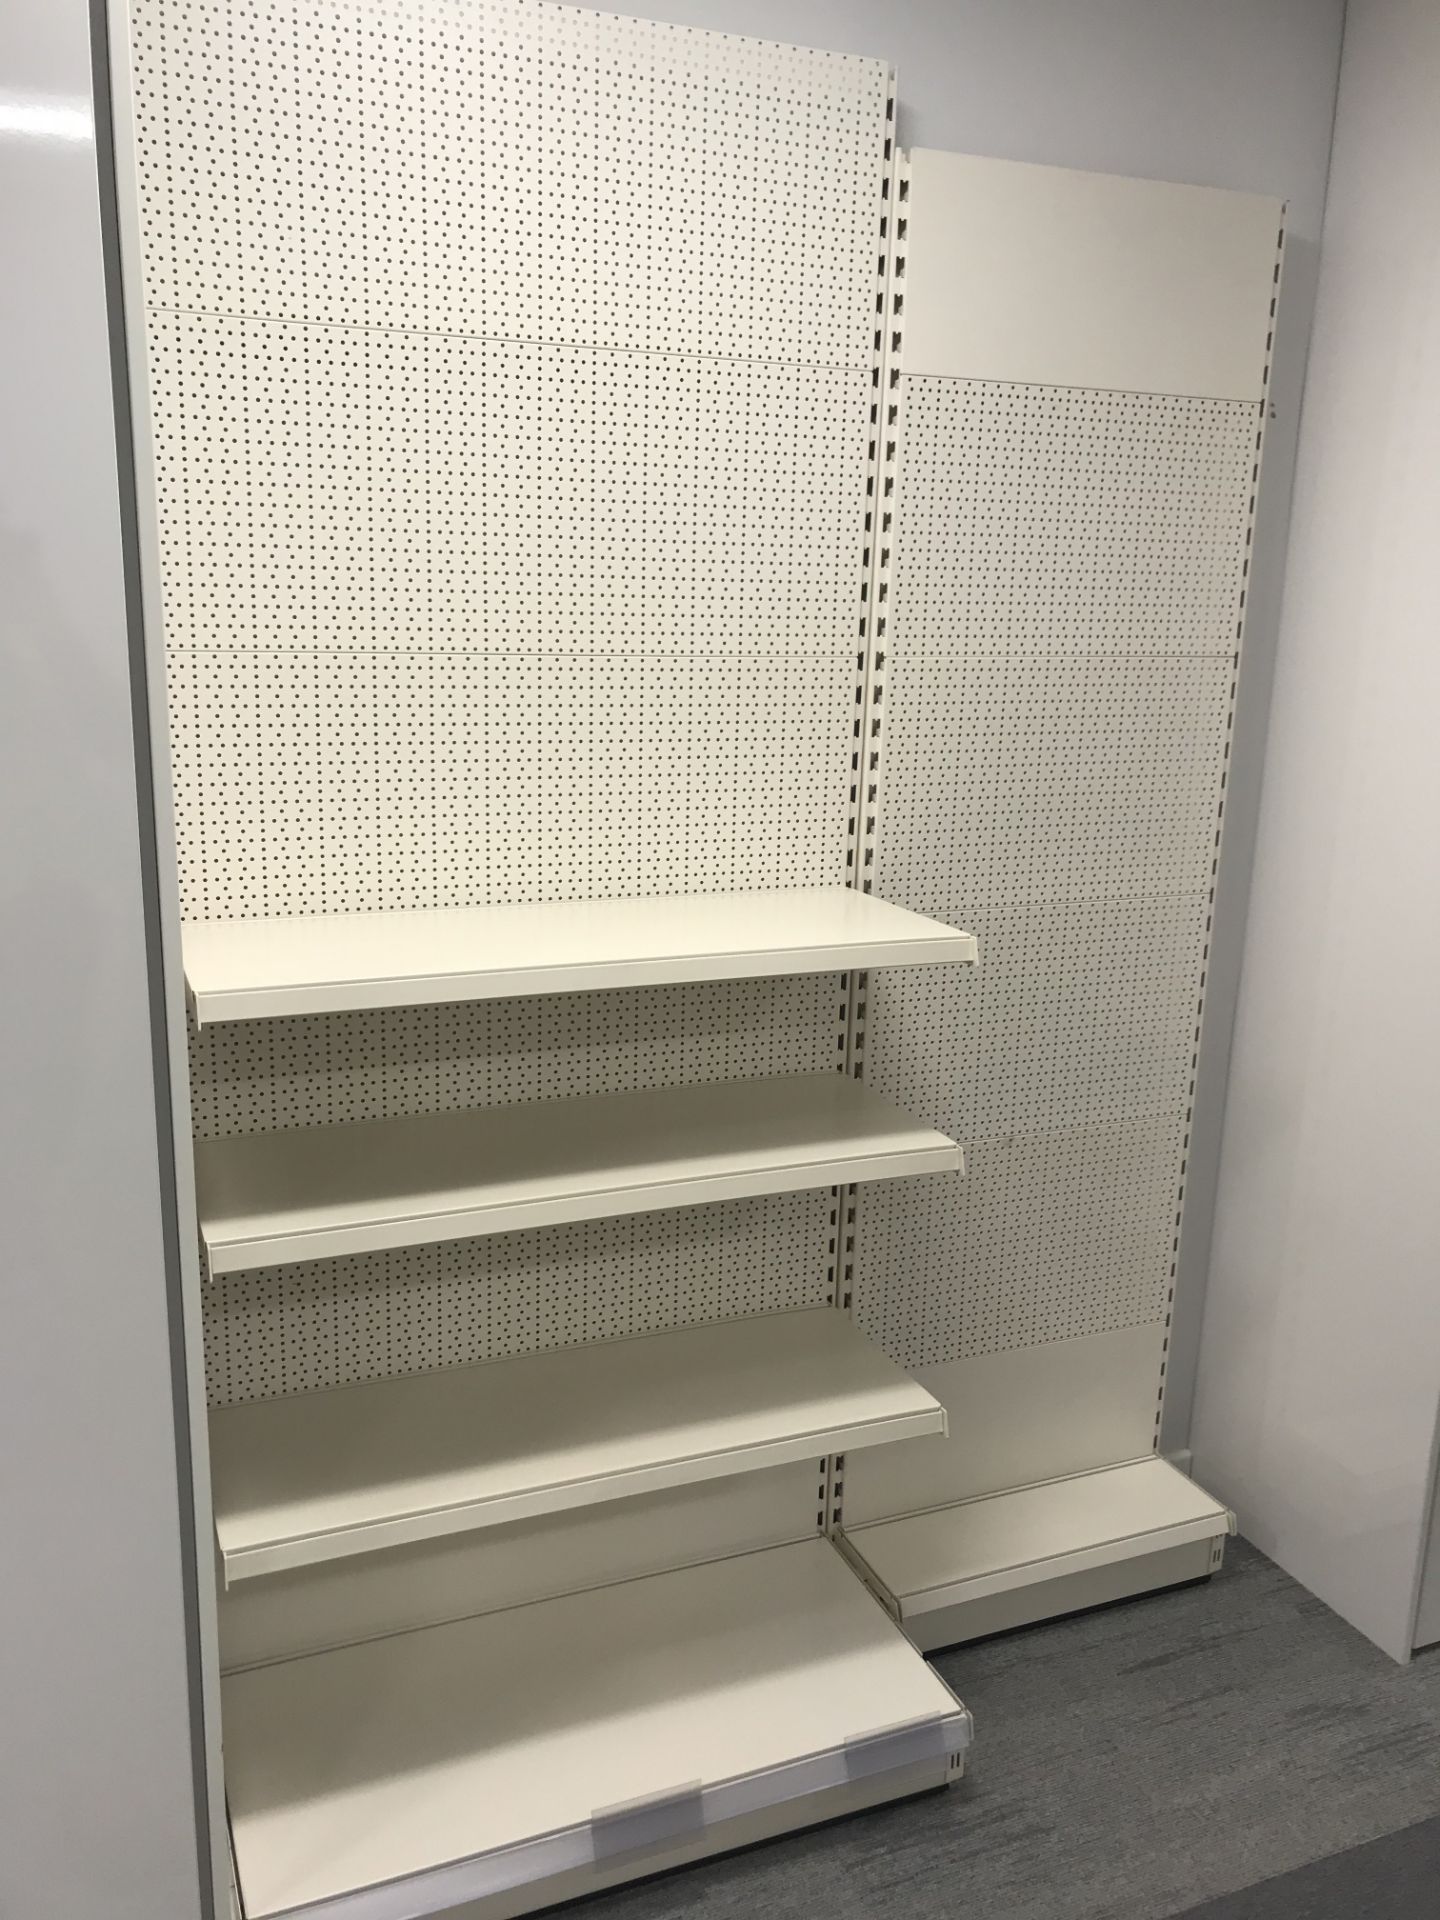 8 x Bays of Single Sided Cantilever Shelving - Image 2 of 4